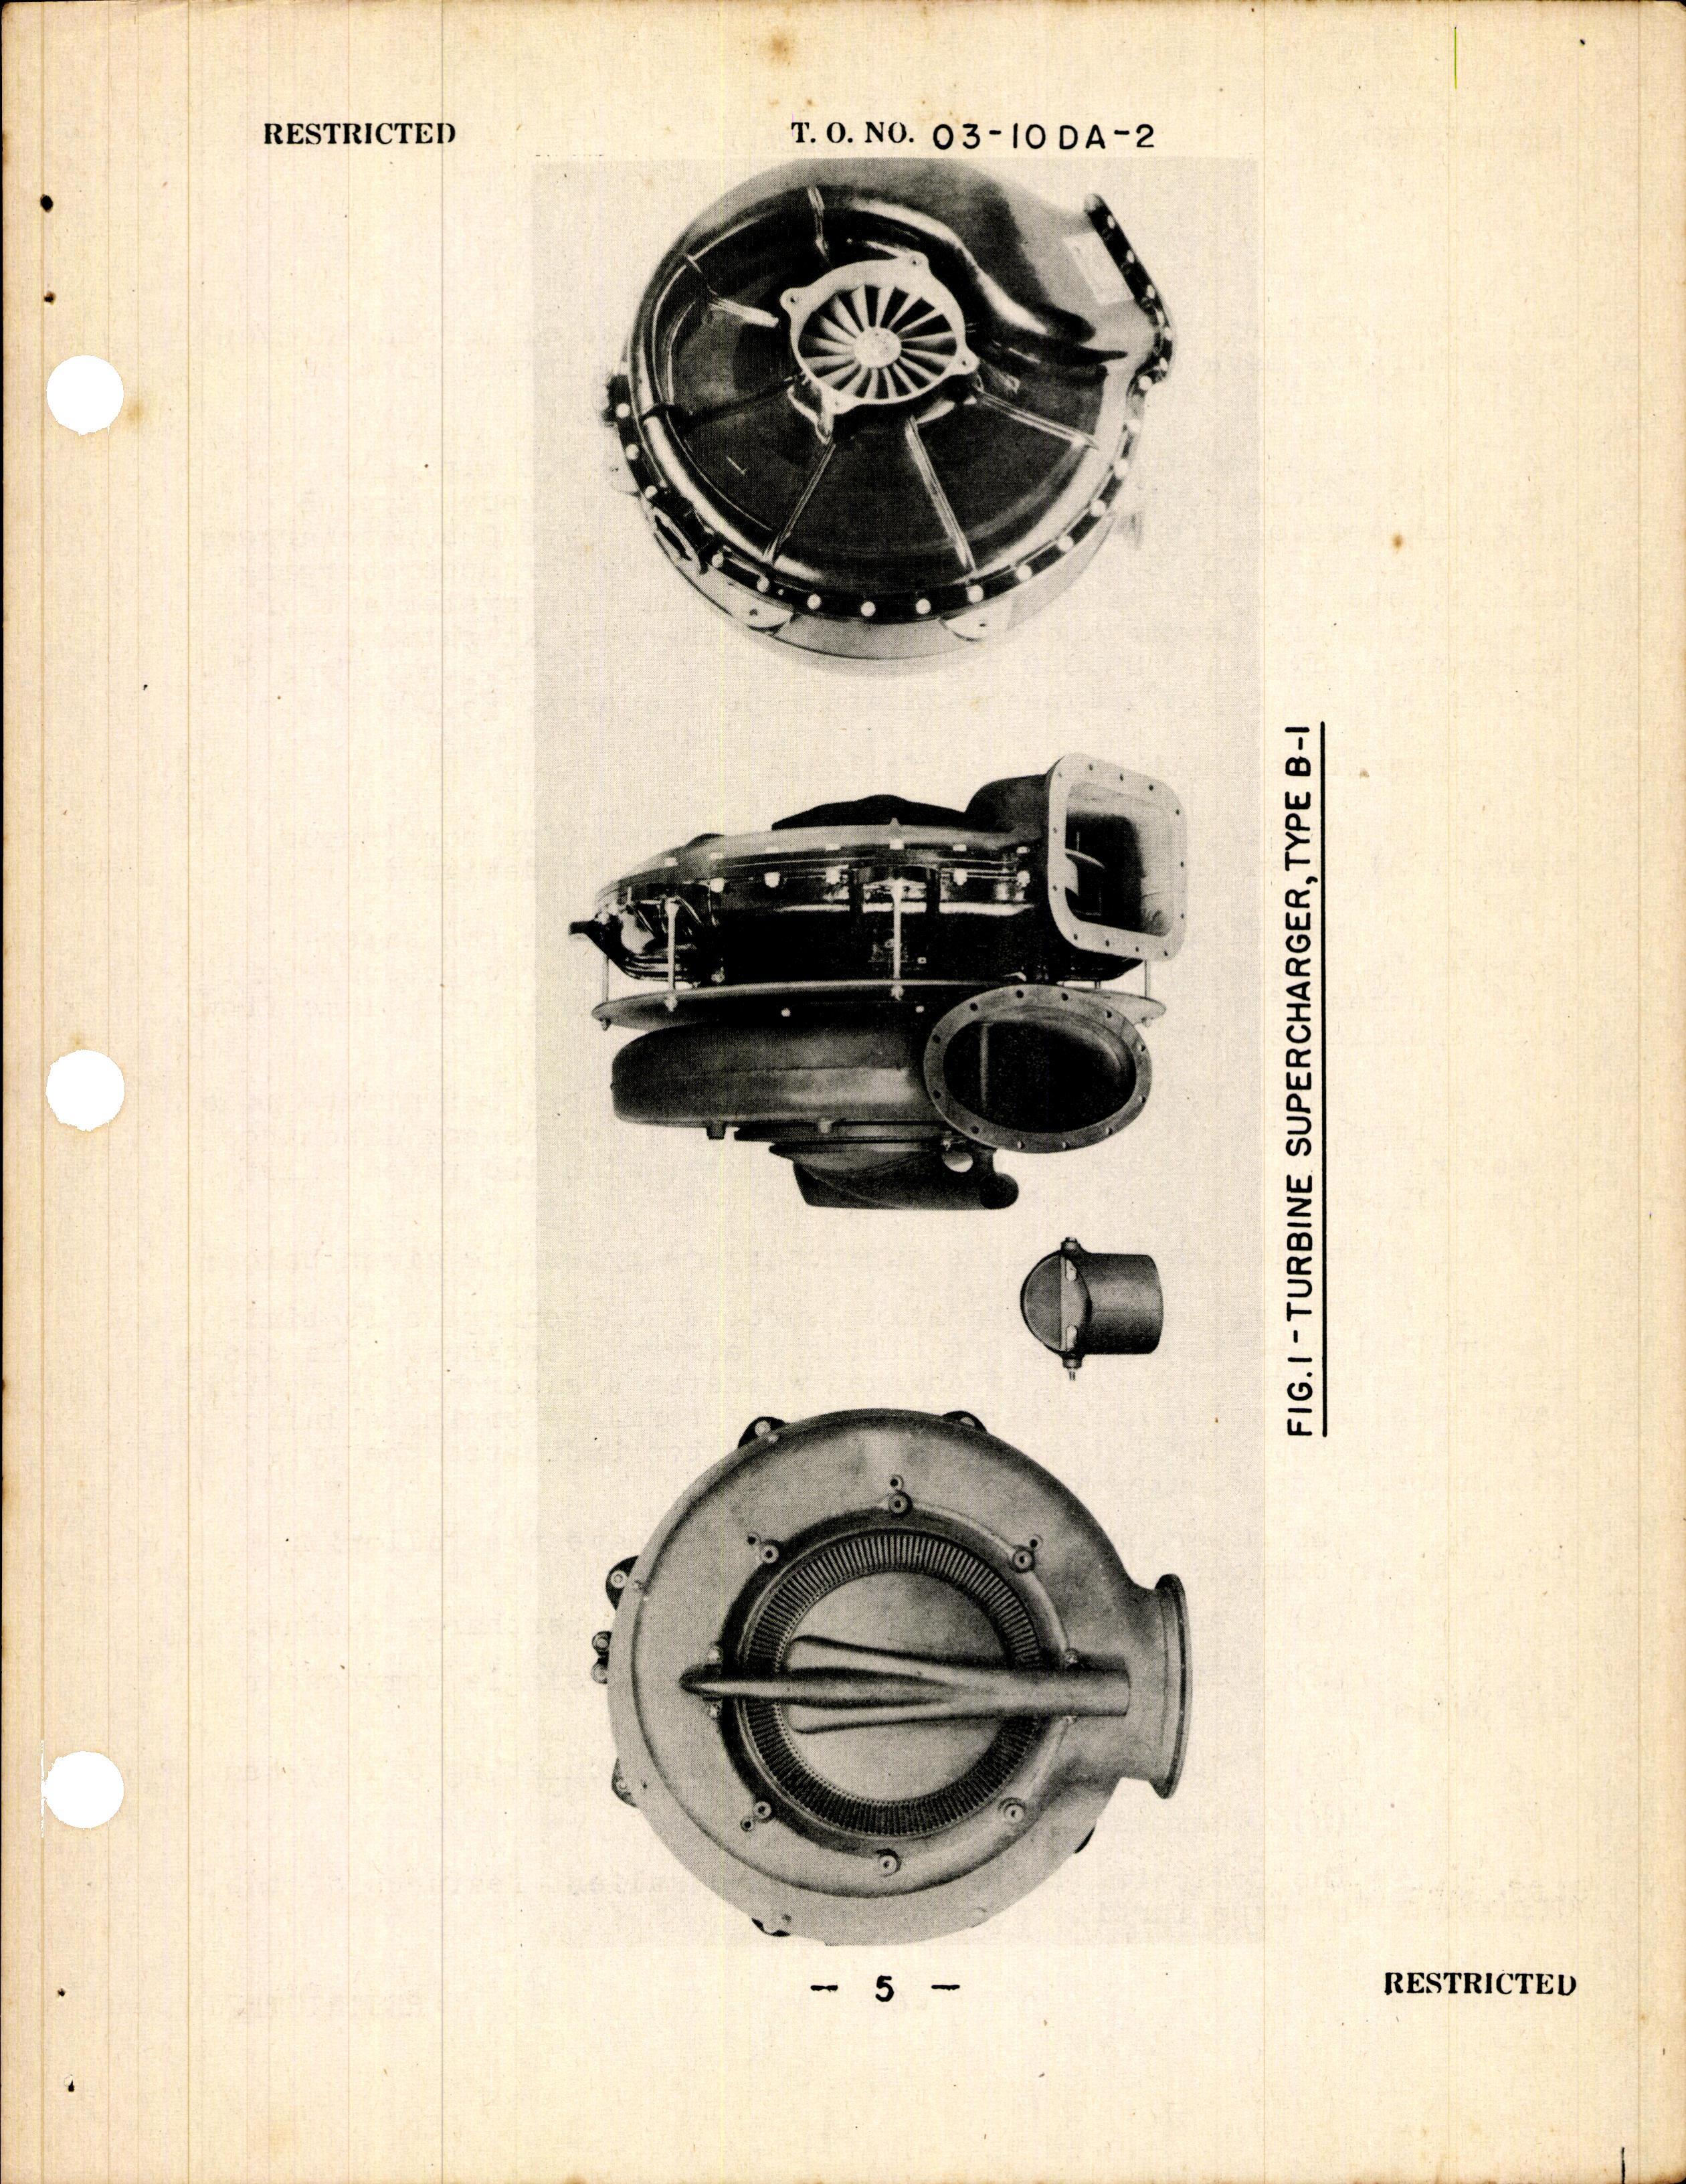 Sample page 7 from AirCorps Library document: Handbook of Operation and Service Instructions for Turbine Driven Superchargers